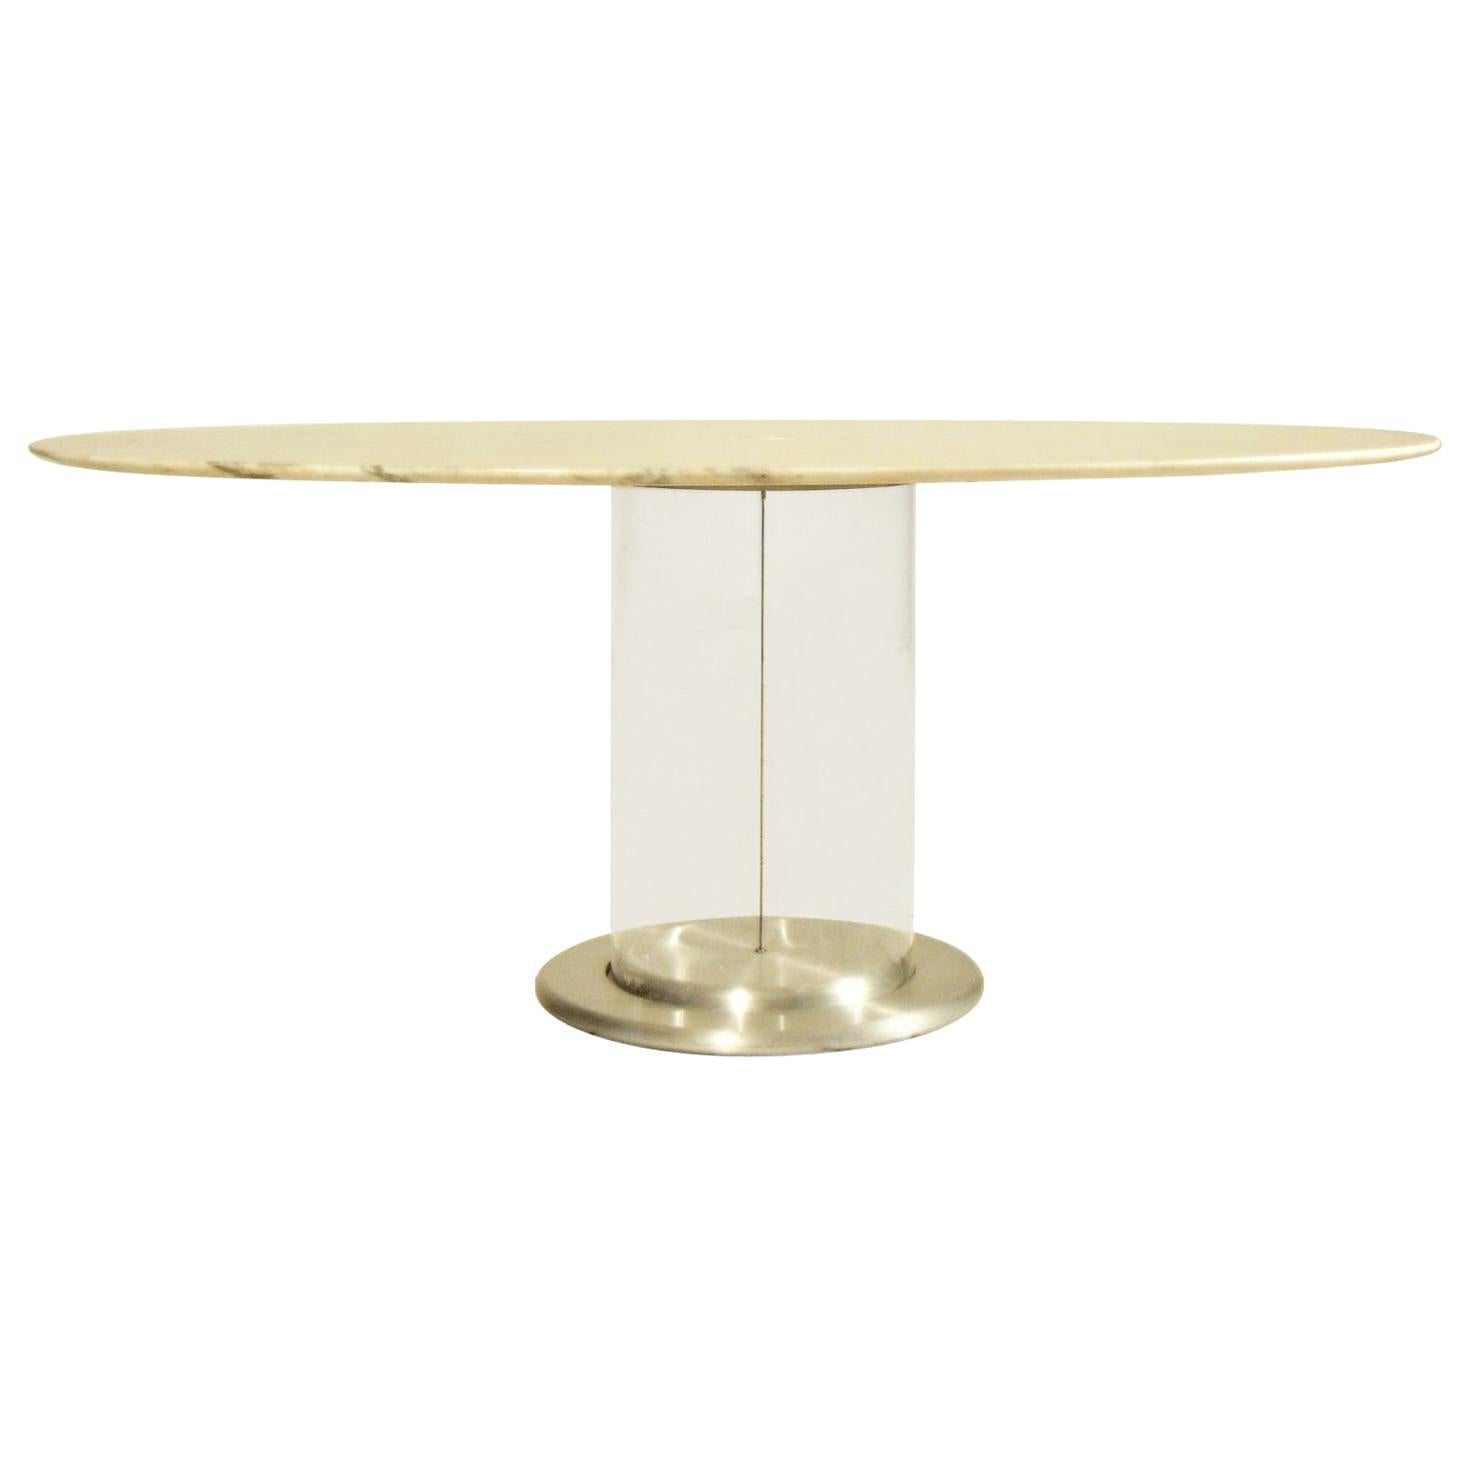 1970s Dining Table, White Marble, Lucite Base Claudio Salocchi for Sormani Italy